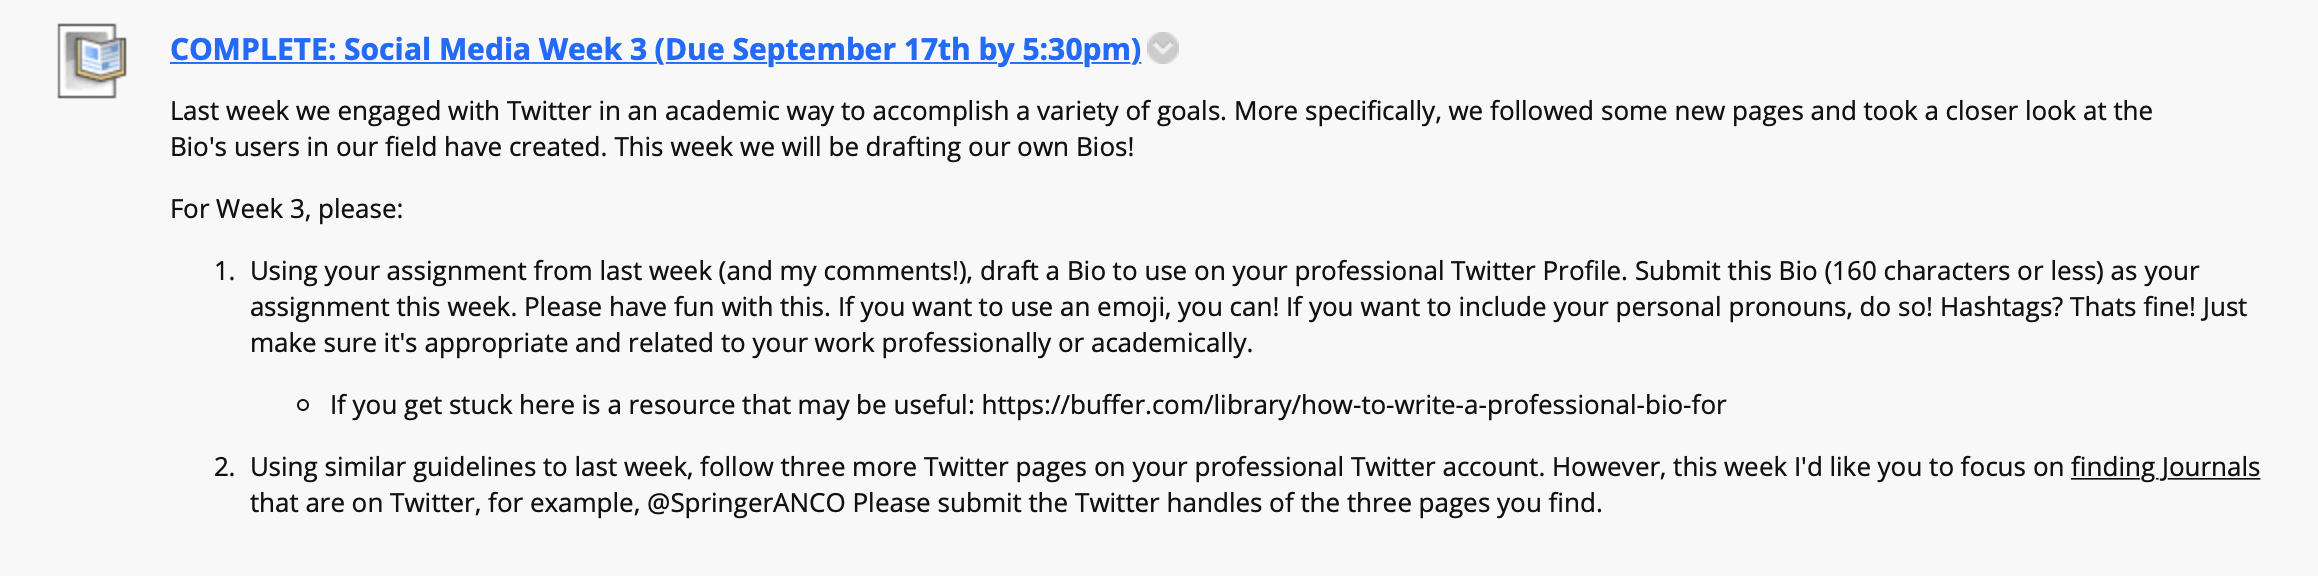 An extended screenshot from a course website that reads: Last week we engaged with Twitter in an academic way to accomplish a variety of goals. More specifically, we followed some new pages and took a closer look at the Bio's users in our field have created. This week we will be drafting our own Bios!
For Week 3, please: 
Using your assignment from last week (and my comments!), draft a Bio to use on your professional Twitter Profile. Submit this Bio (160 characters or less) as your assignment this week. Please have fun with this. If you want to use an emoji, you can! If you want to include your personal pronouns, do so! Hashtags? That’s fine! Just make sure it's appropriate and related to your work professionally or academically. 
If you get stuck here is a resource that may be useful: https://buffer.com/library/how-to-write-a-professional-bio-for 
Using similar guidelines to last week, follow three more Twitter pages on your professional Twitter account. However, this week I'd like you to focus on finding Journals that are on Twitter, for example, @SpringerANCO Please submit the Twitter handles of the three pages you find. 
